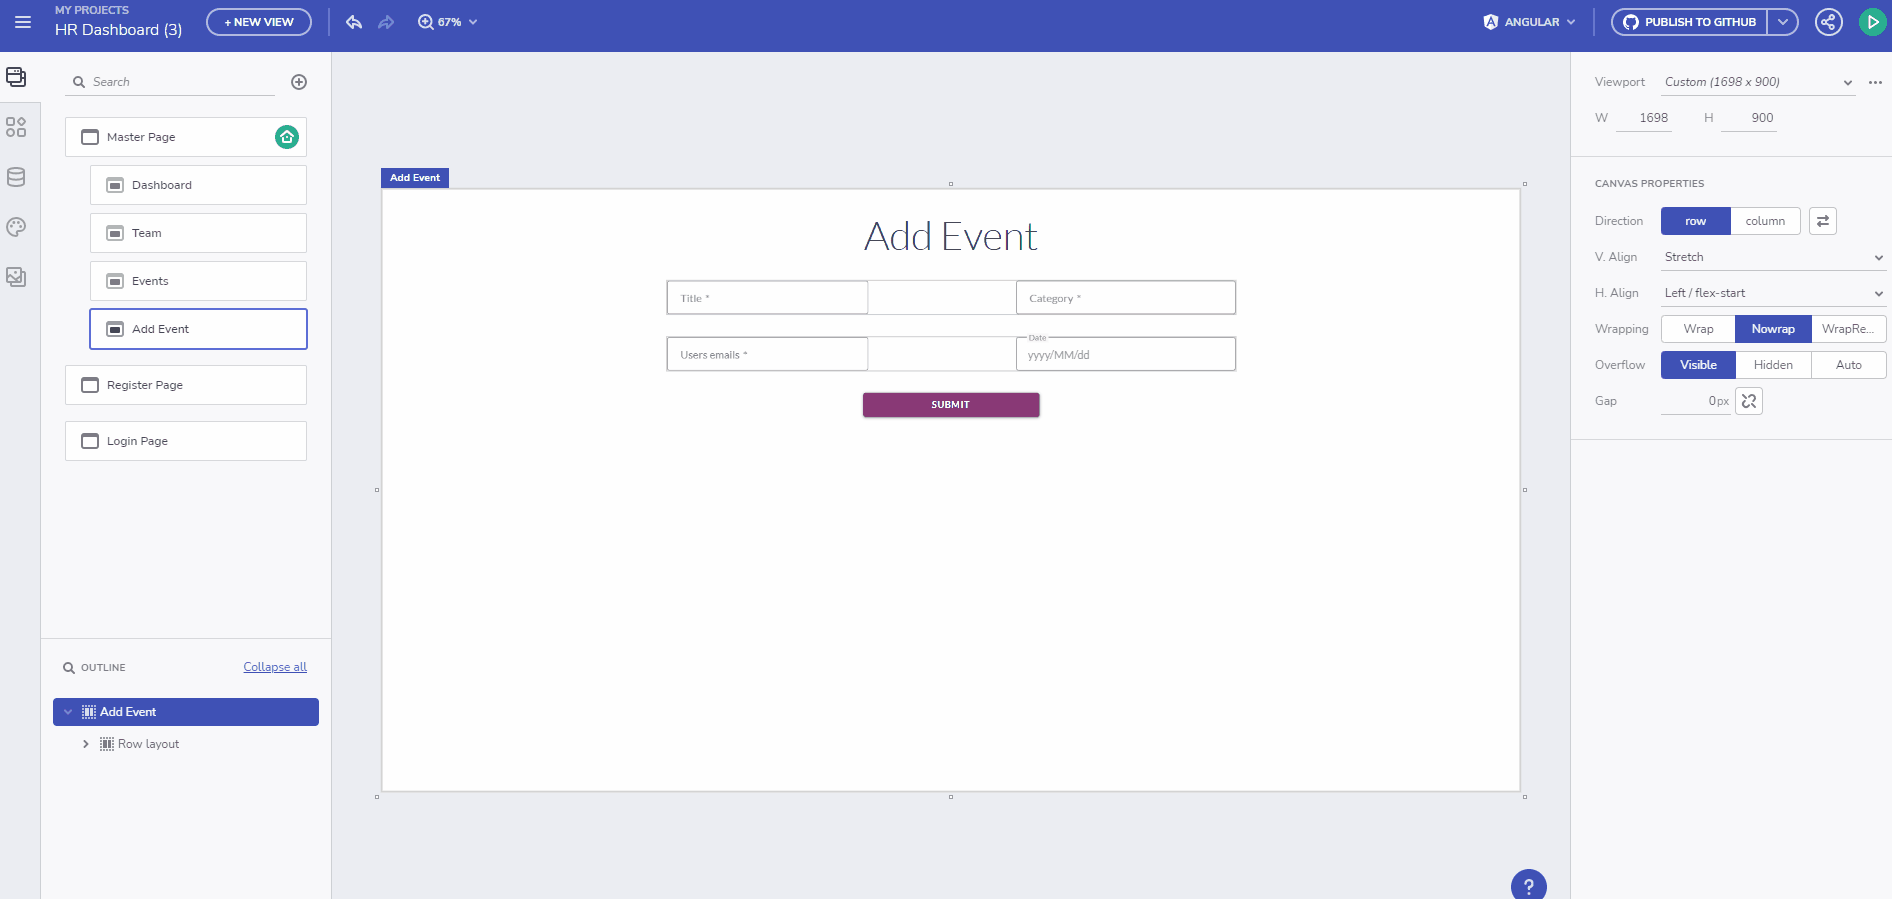 create a similar page for changing the roles of users in App Builder